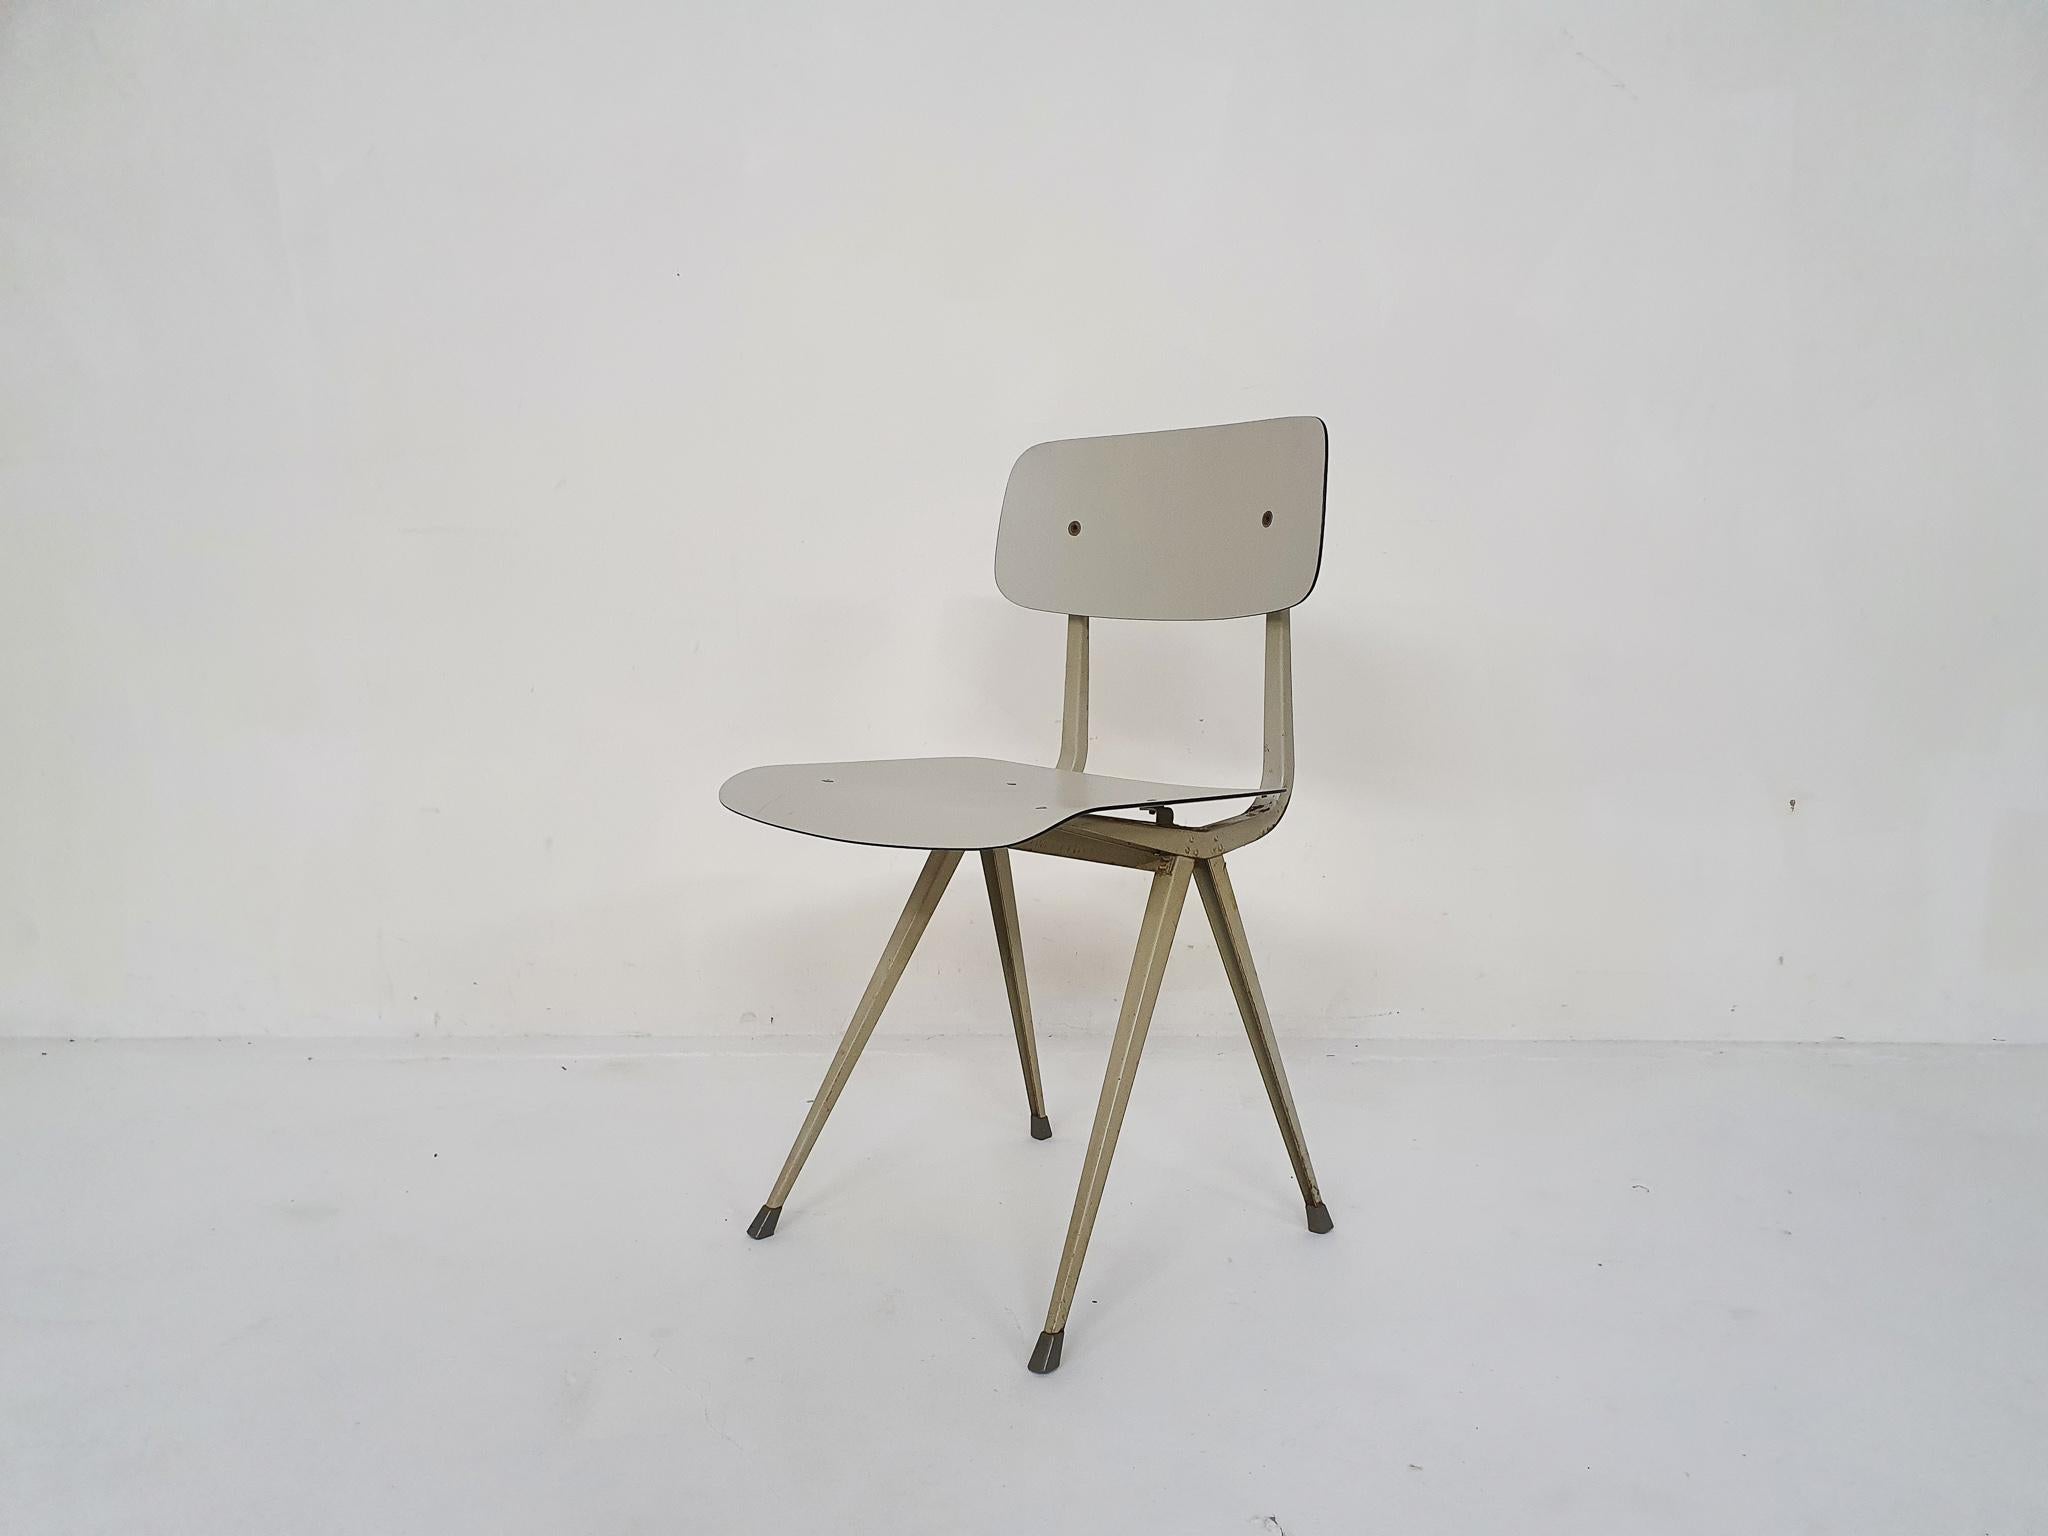 White metal frame and white Ciranol seating and back.
Frame has some rust.

Kramer is the son of architect Piet Kramer. In 1963 he founded, together with Wim Crouwel, Benno Wissing, Paul and Dick Schwarz Total Design. From the period of 1971 till